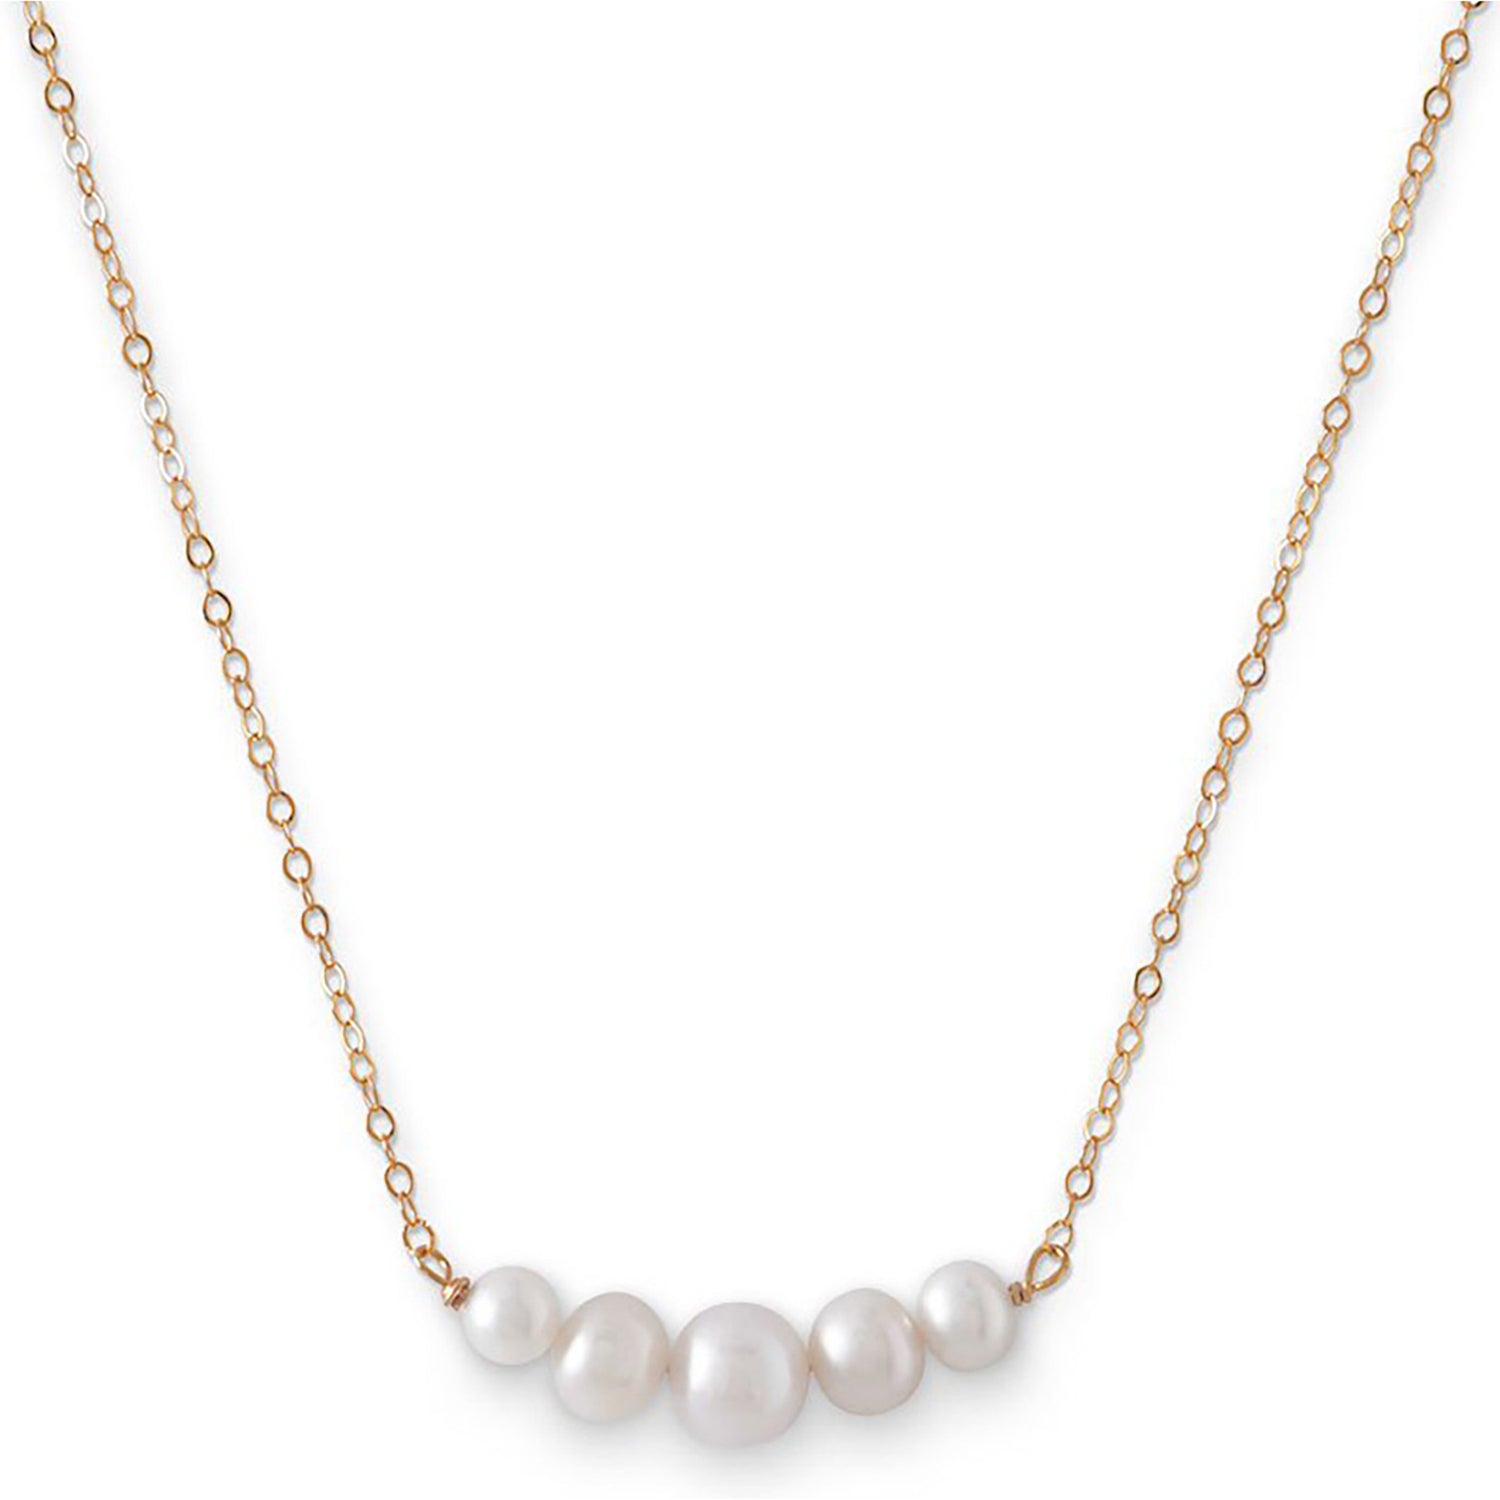 Near Round Freshwater Pearl Necklace